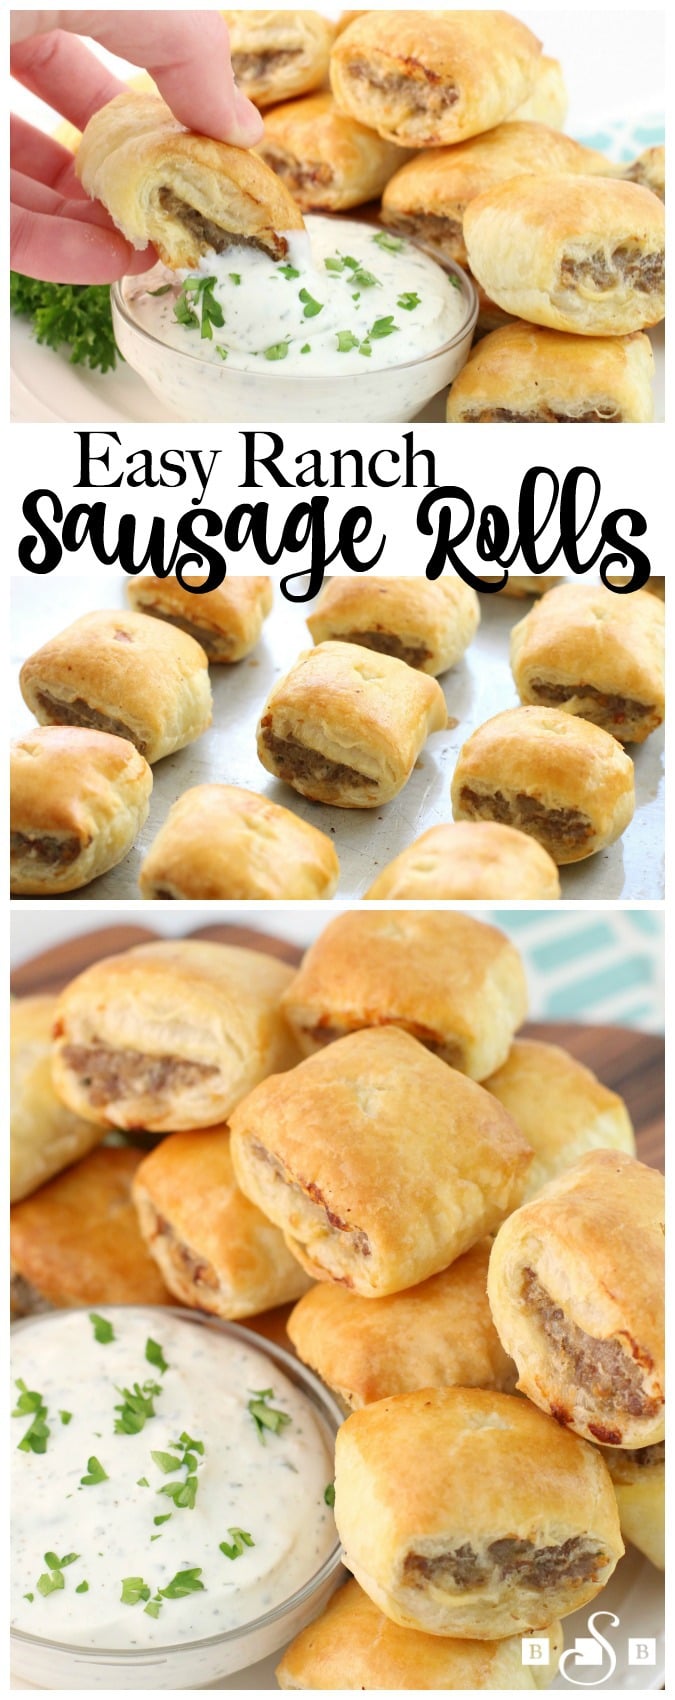 Ranch Sausage Roll recipe made with sausage, puff pastry, ranch seasoning and cheese. Perfect appetizer recipe for parties and game day get-togethers!